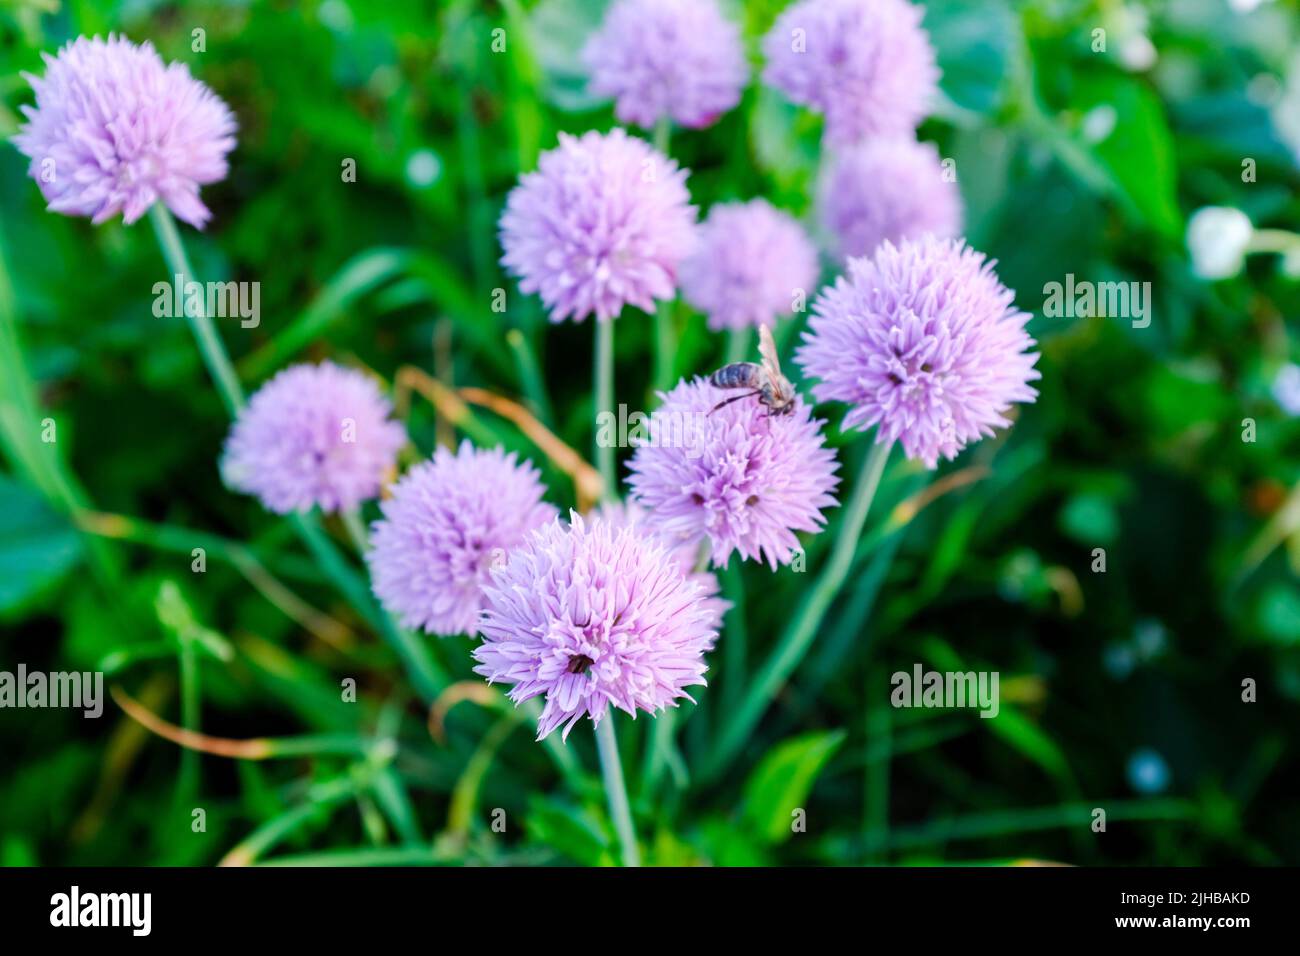 Blossoming herbal chives growing and flowering in a garden. Green background with light purple flowering chives for publication, design, poster Stock Photo